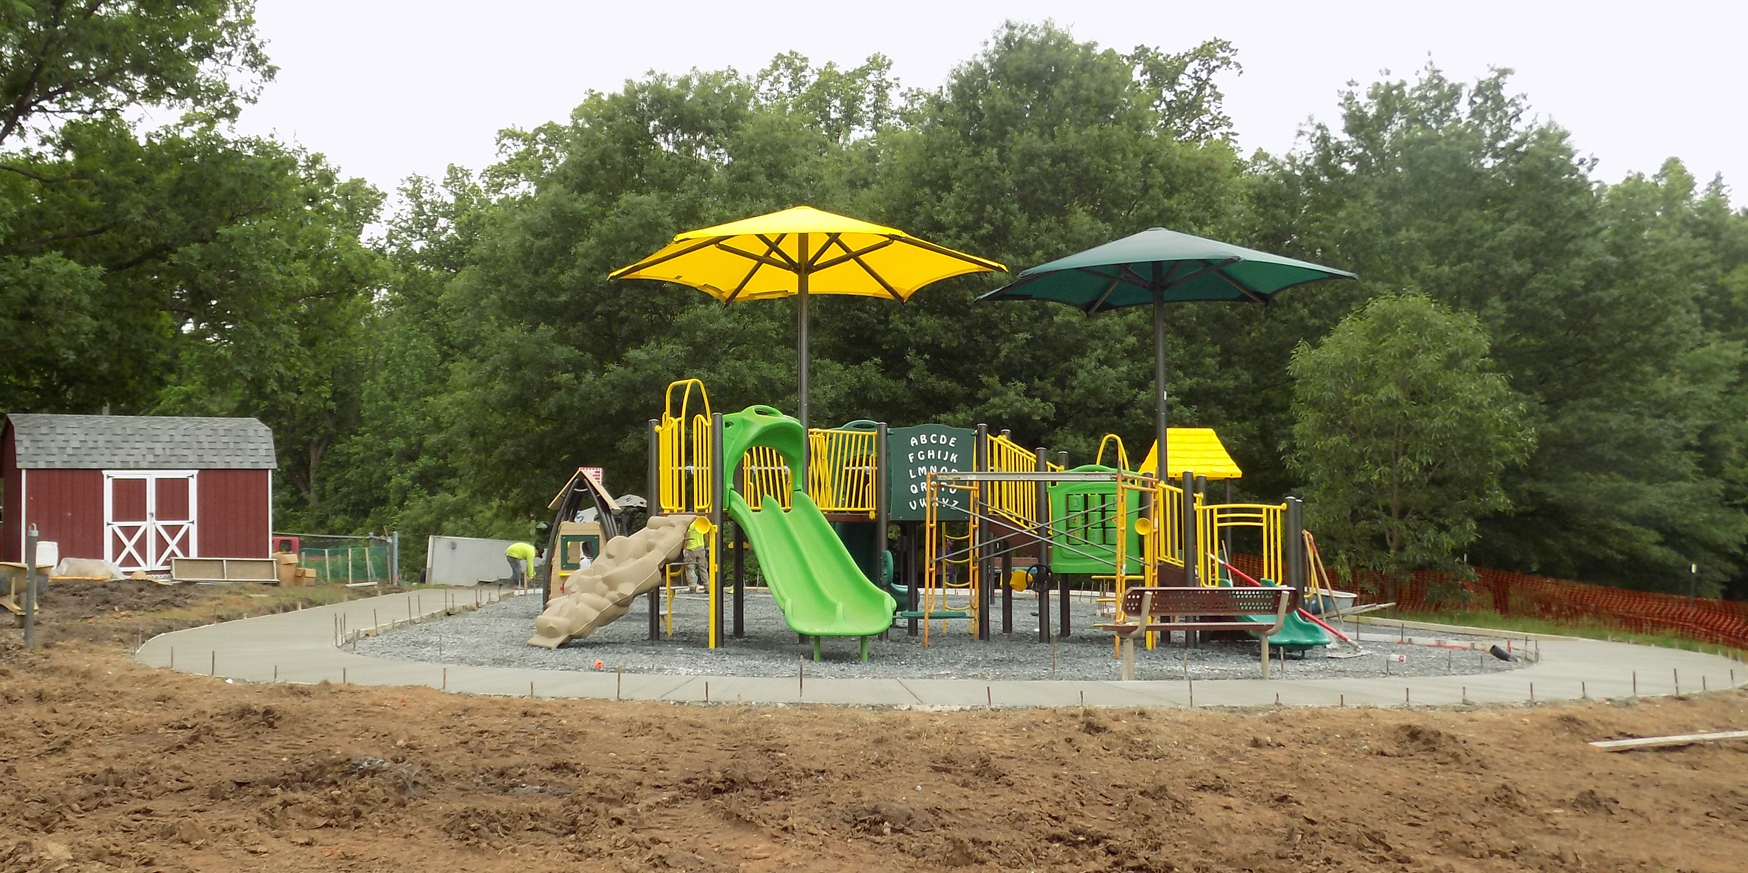 Upgraded Community Center Playground Opens in Summer